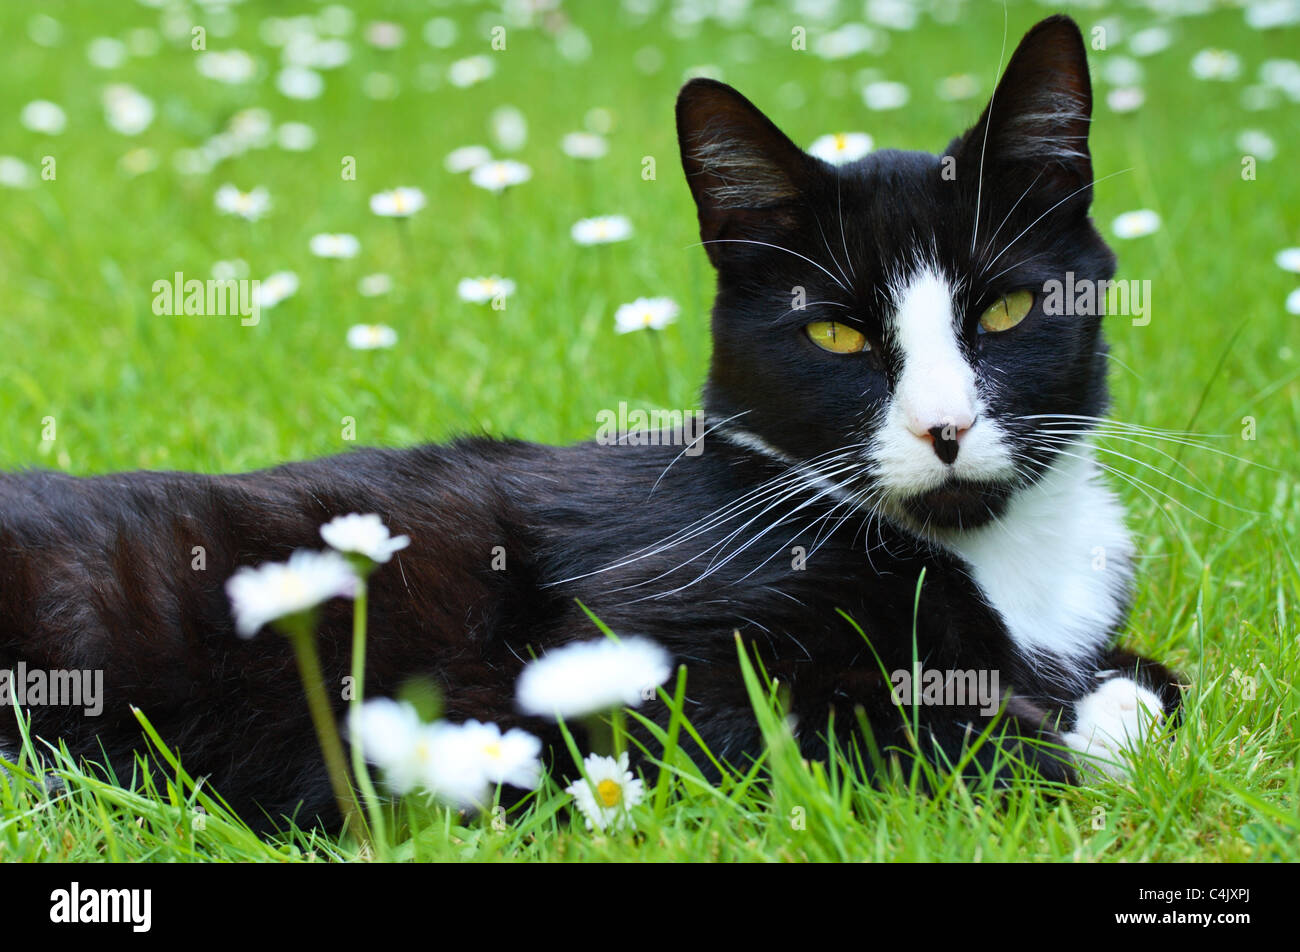 A black and white domestic cat lying amongst lawn daisies (Bellis perennis L.) in a suburban garden in the United Kingdom Stock Photo